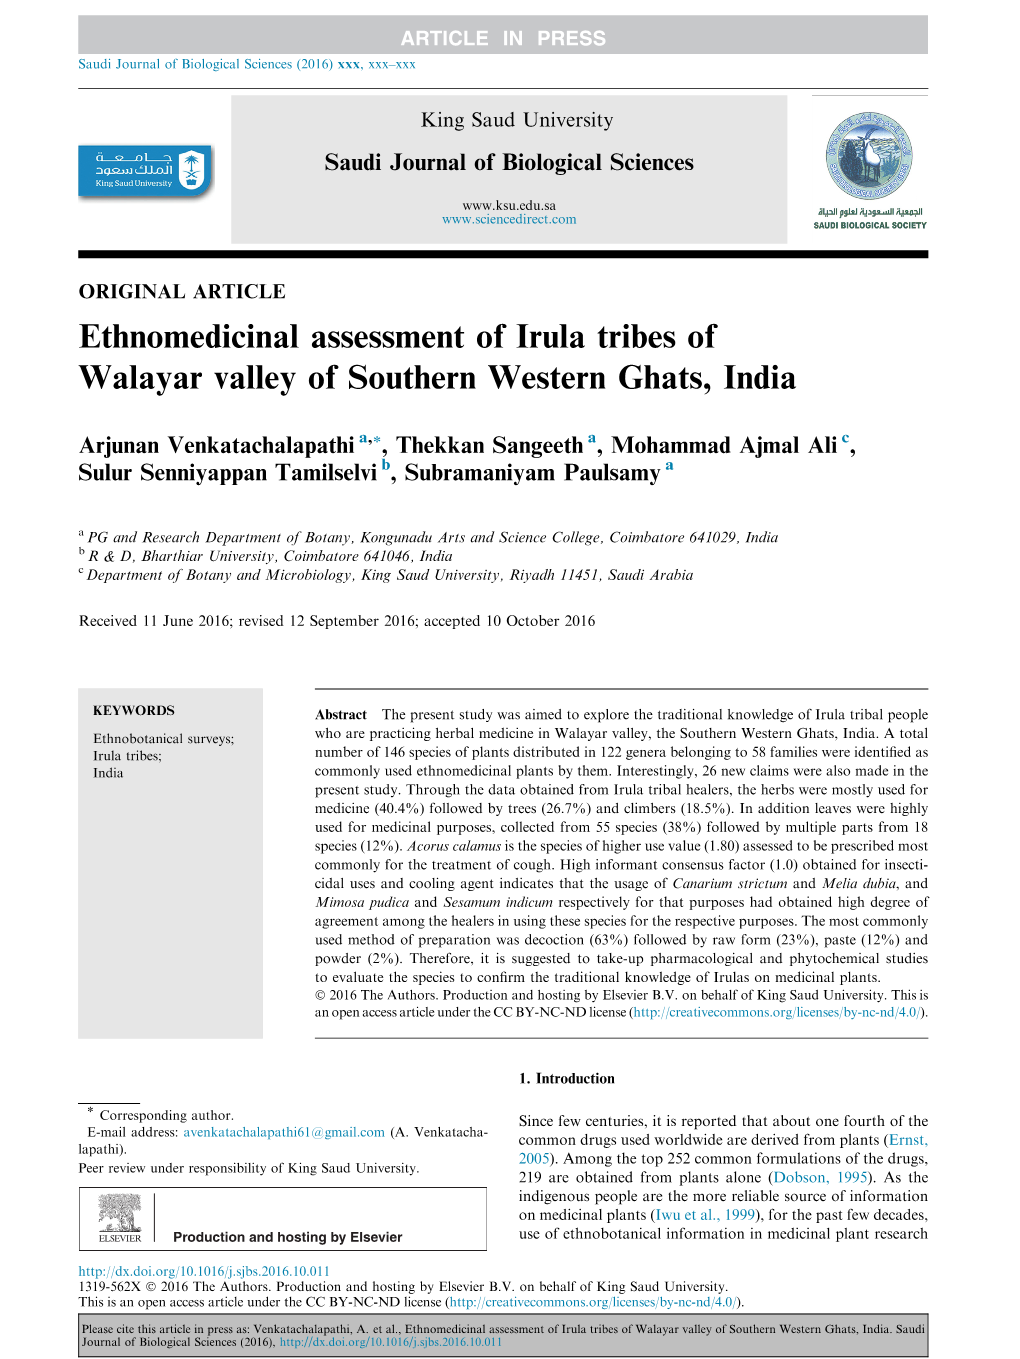 Ethnomedicinal Assessment of Irula Tribes of Walayar Valley of Southern Western Ghats, India